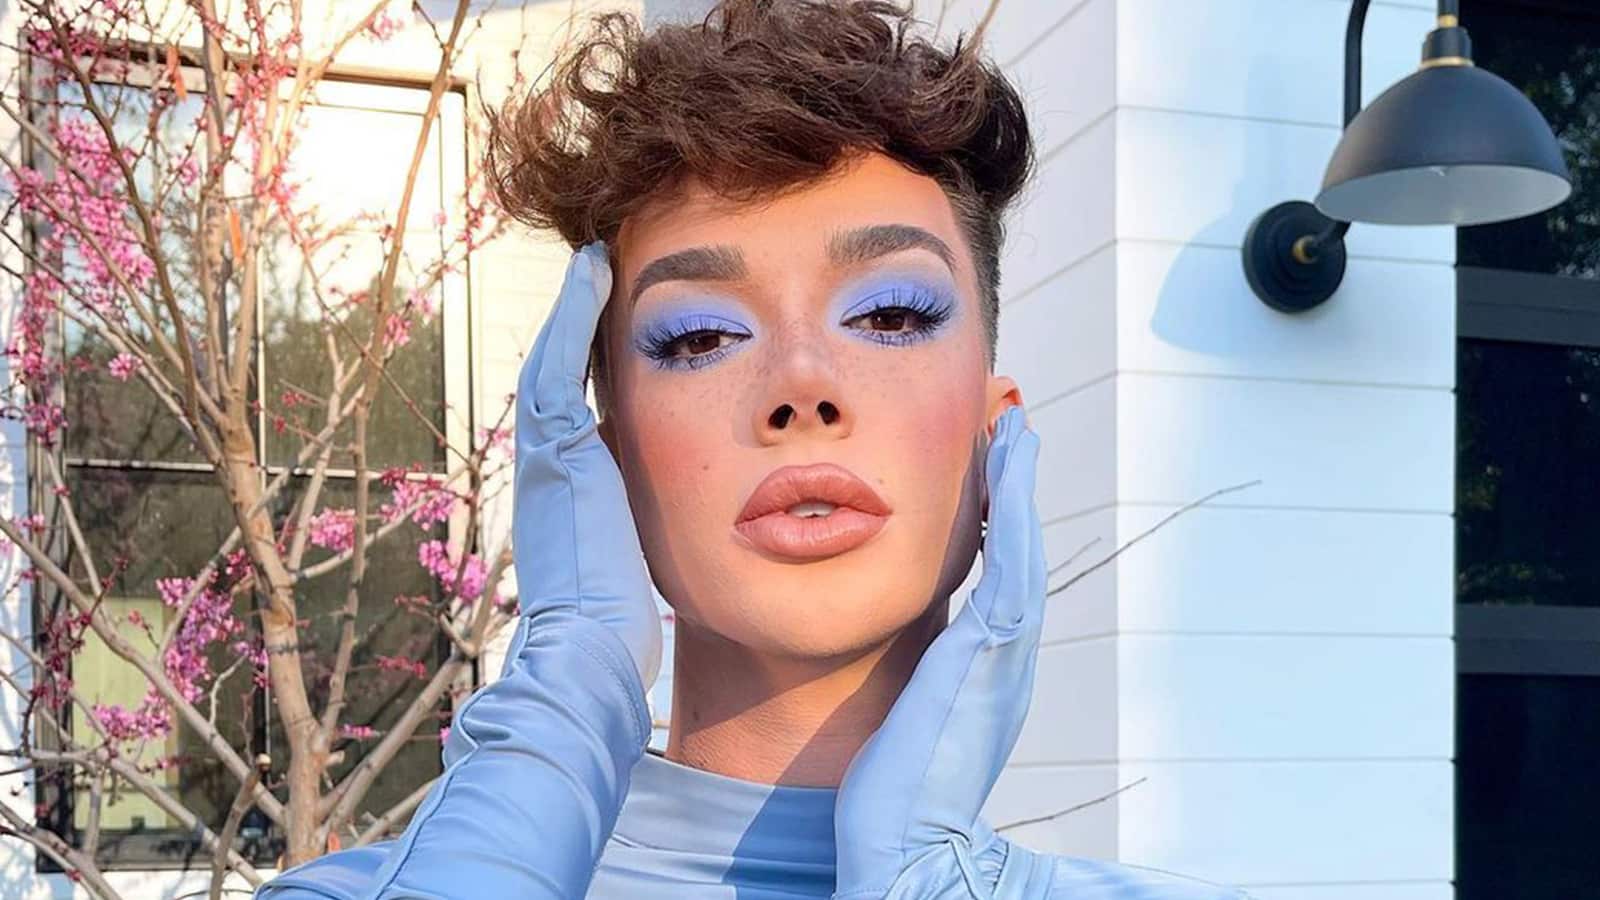 James Charles poses in blue make up